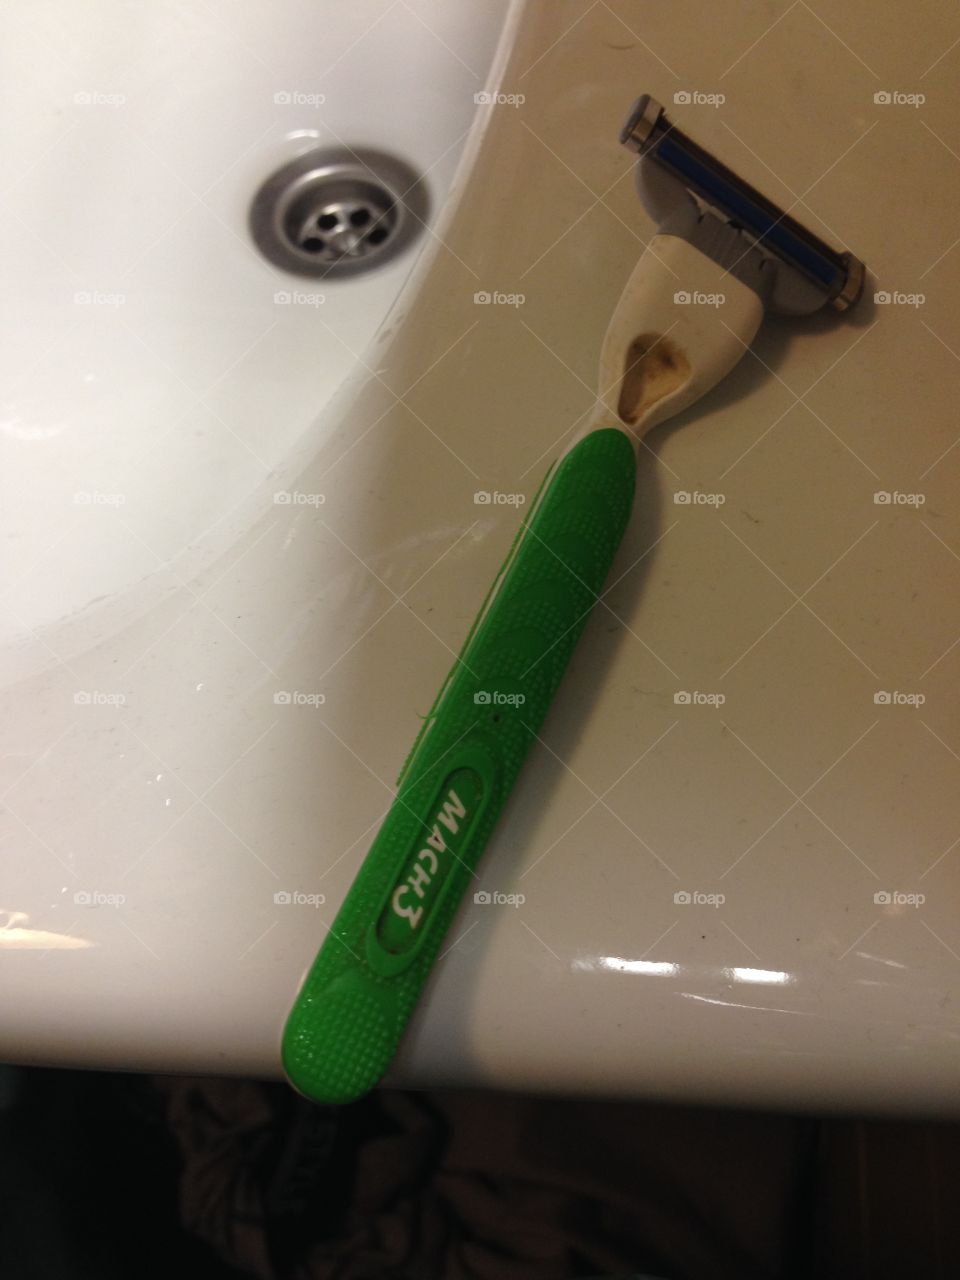 Razor at the side of the sink, ready for the daily shaving ritual.